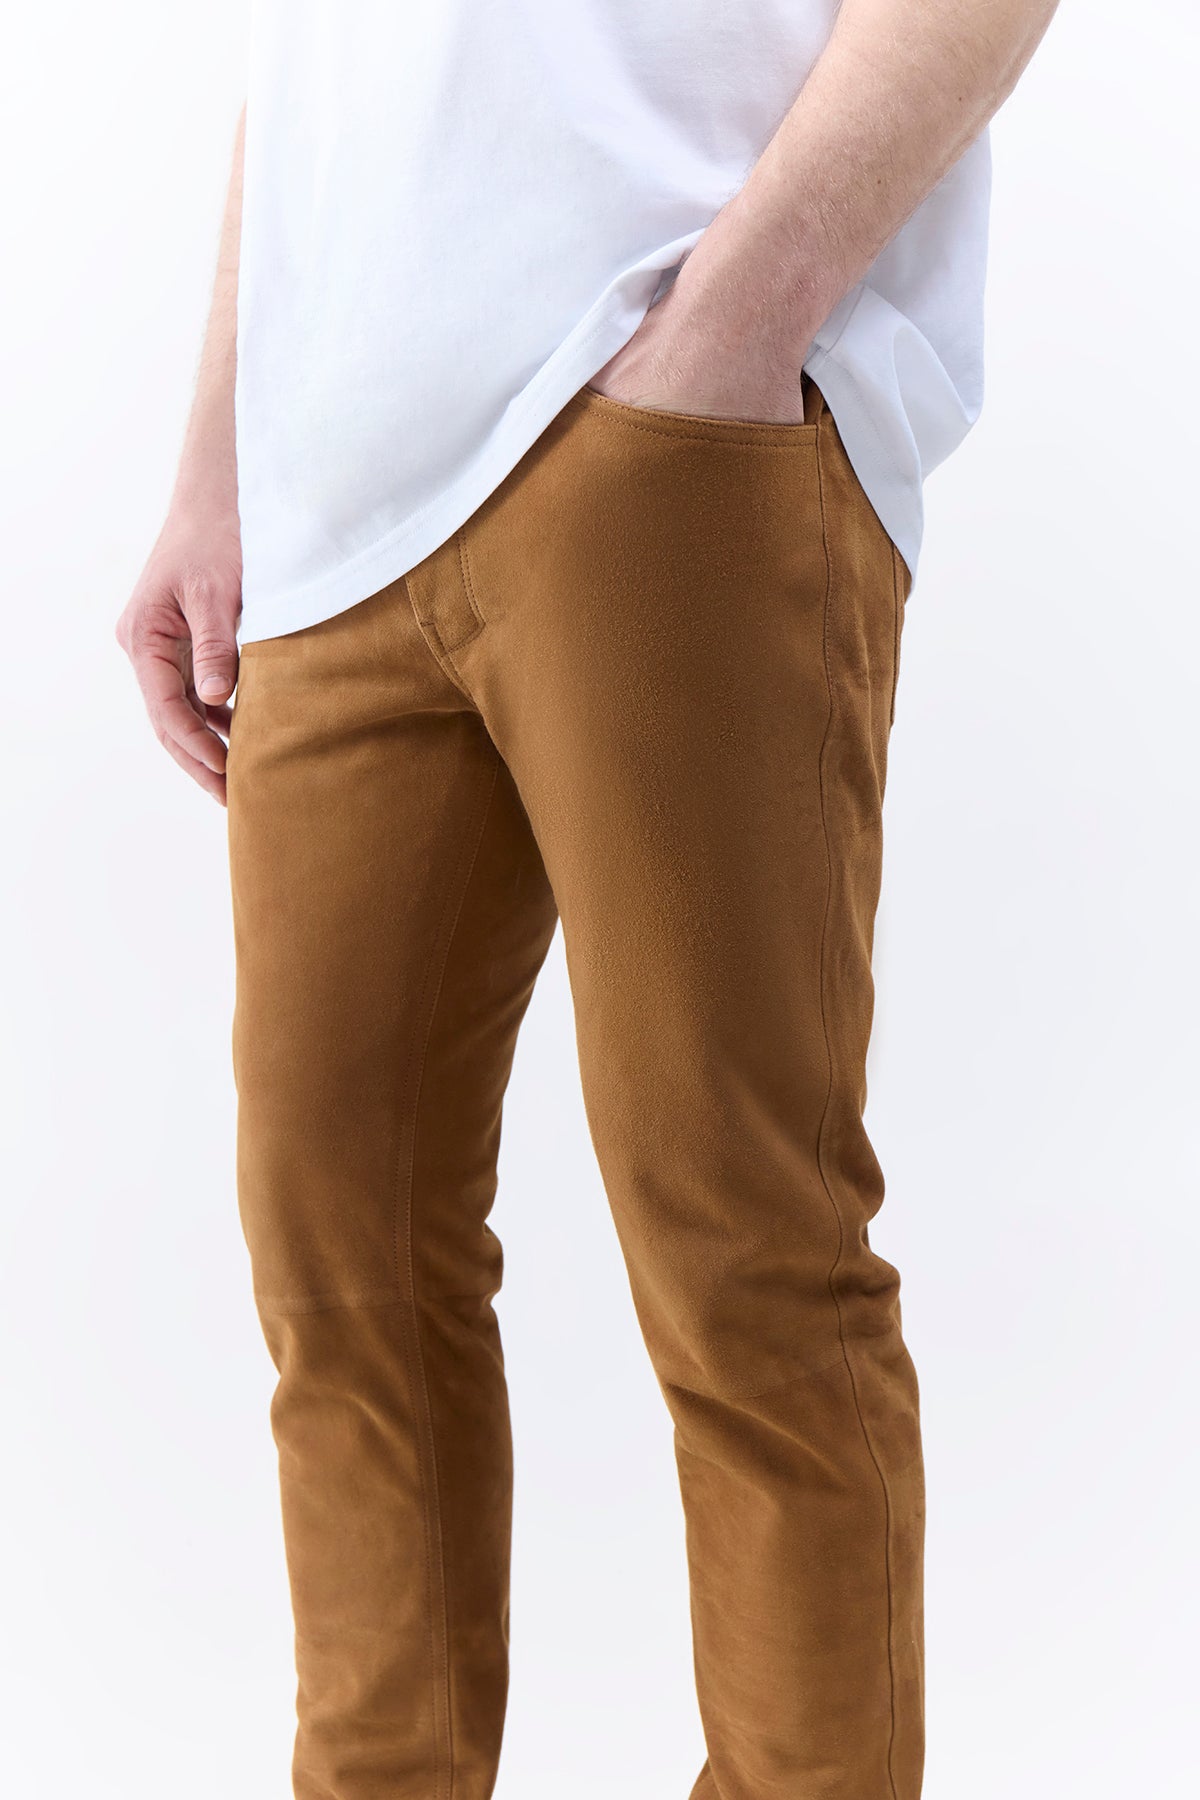 Anthony Five Pocket Pant in Camel Suede